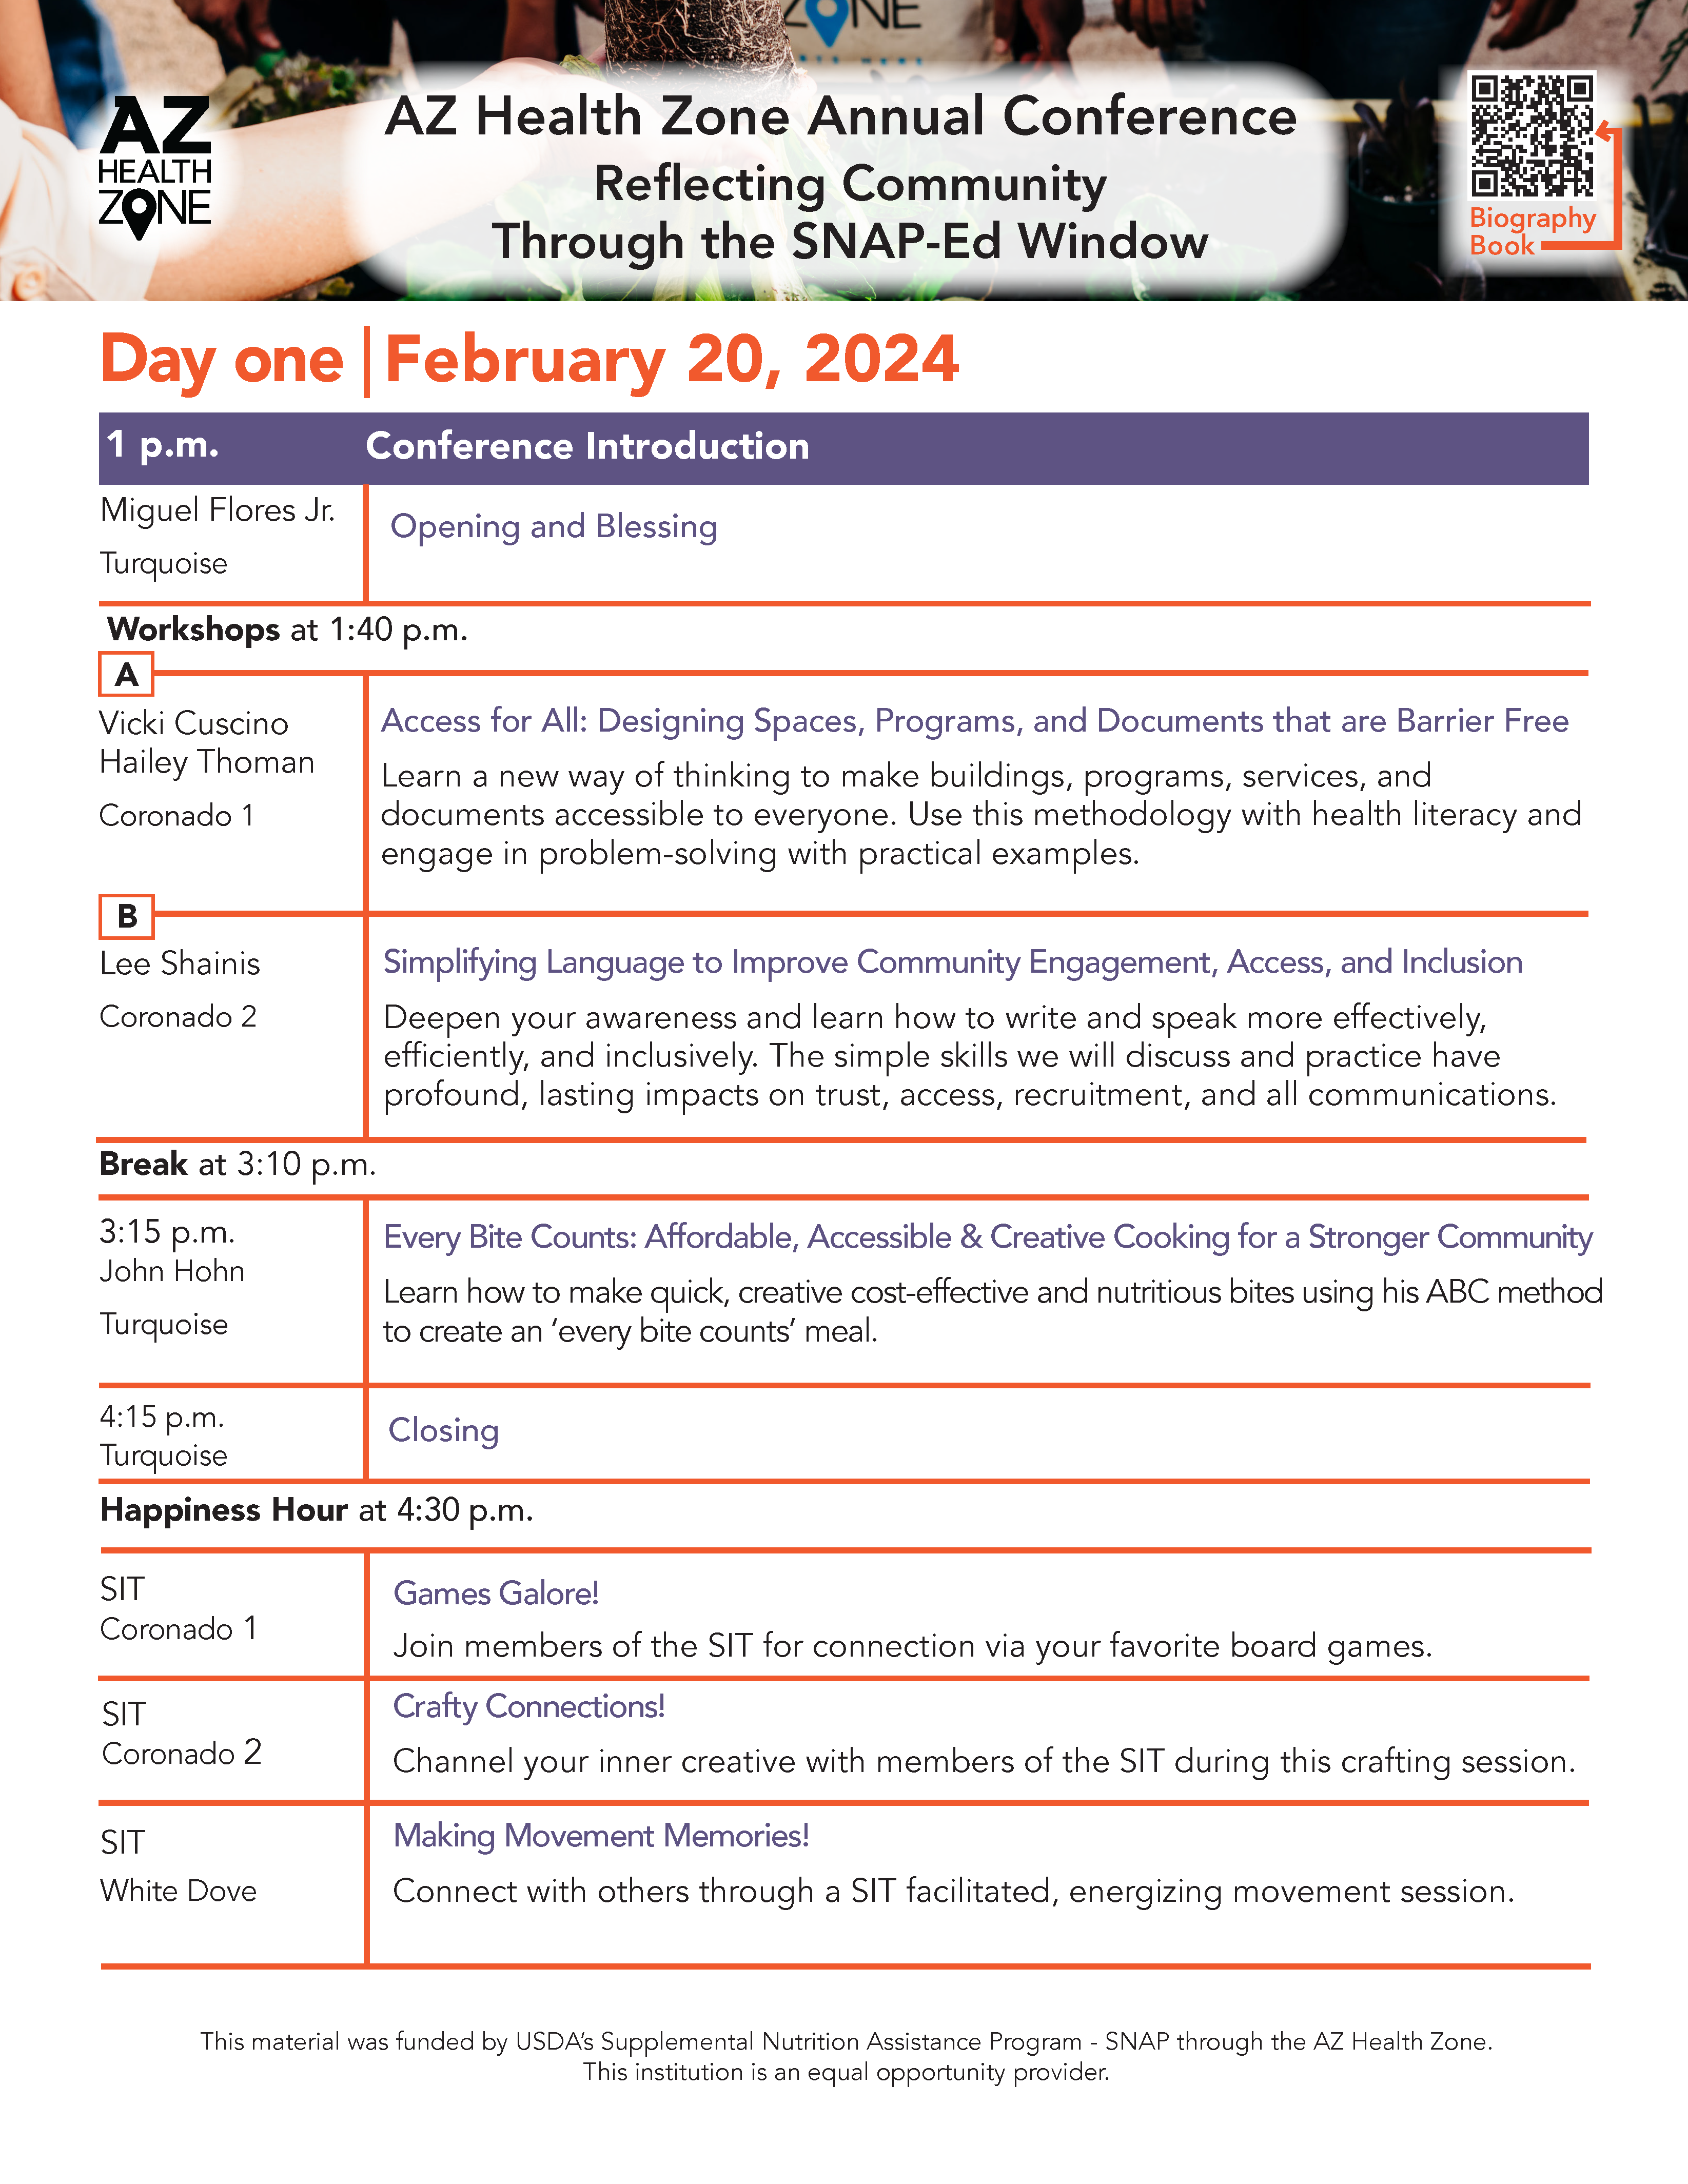 FFY2024 Conference Agenda Day One